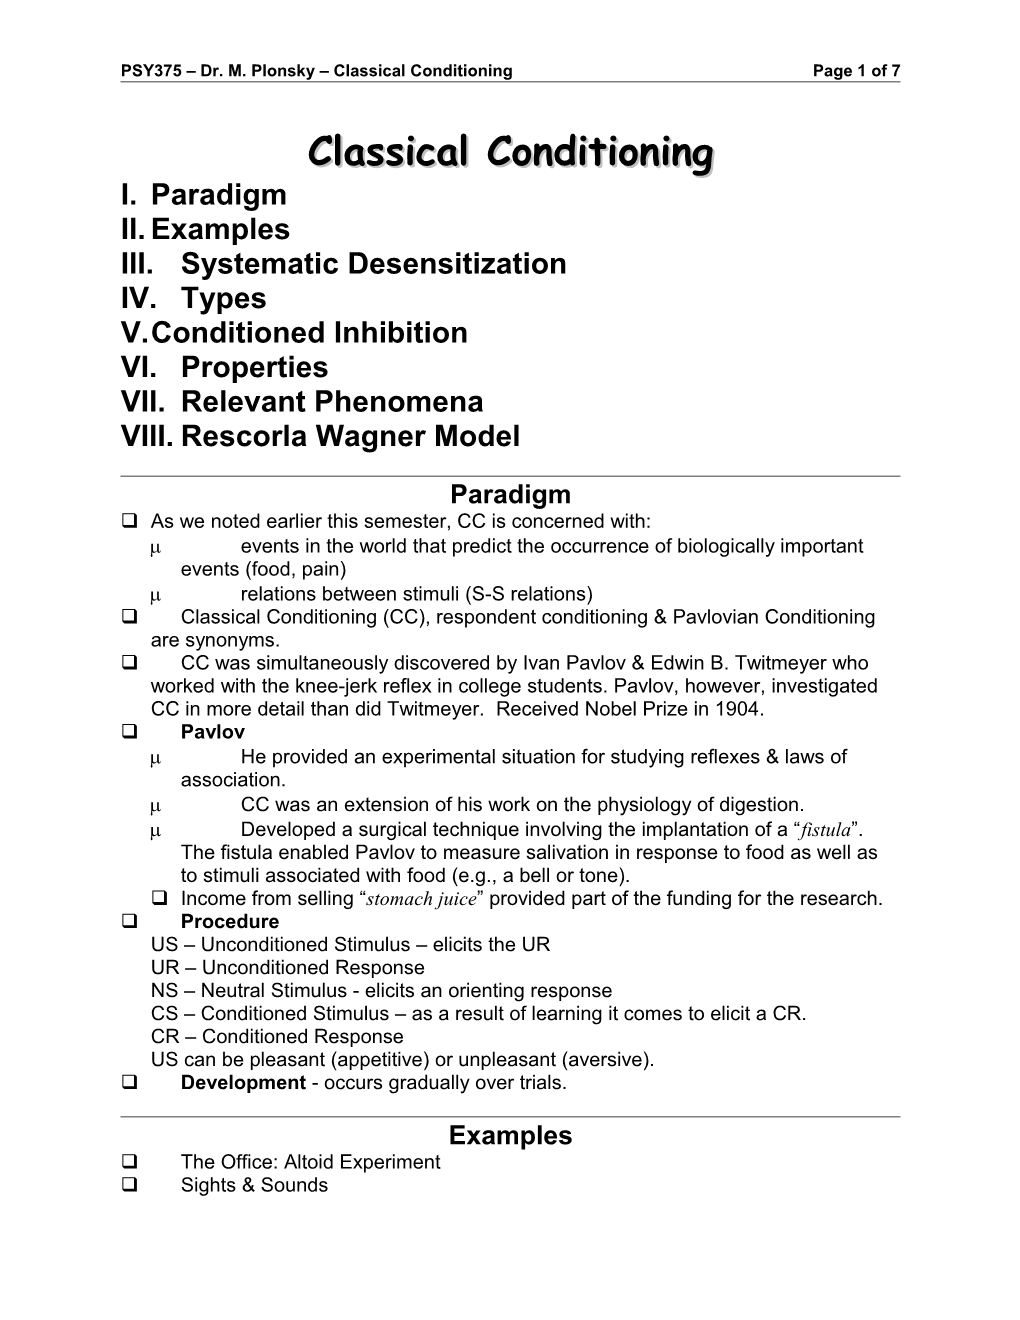 PSY375 Dr.M.Plonsky Classical Conditioningpage 1 of 7